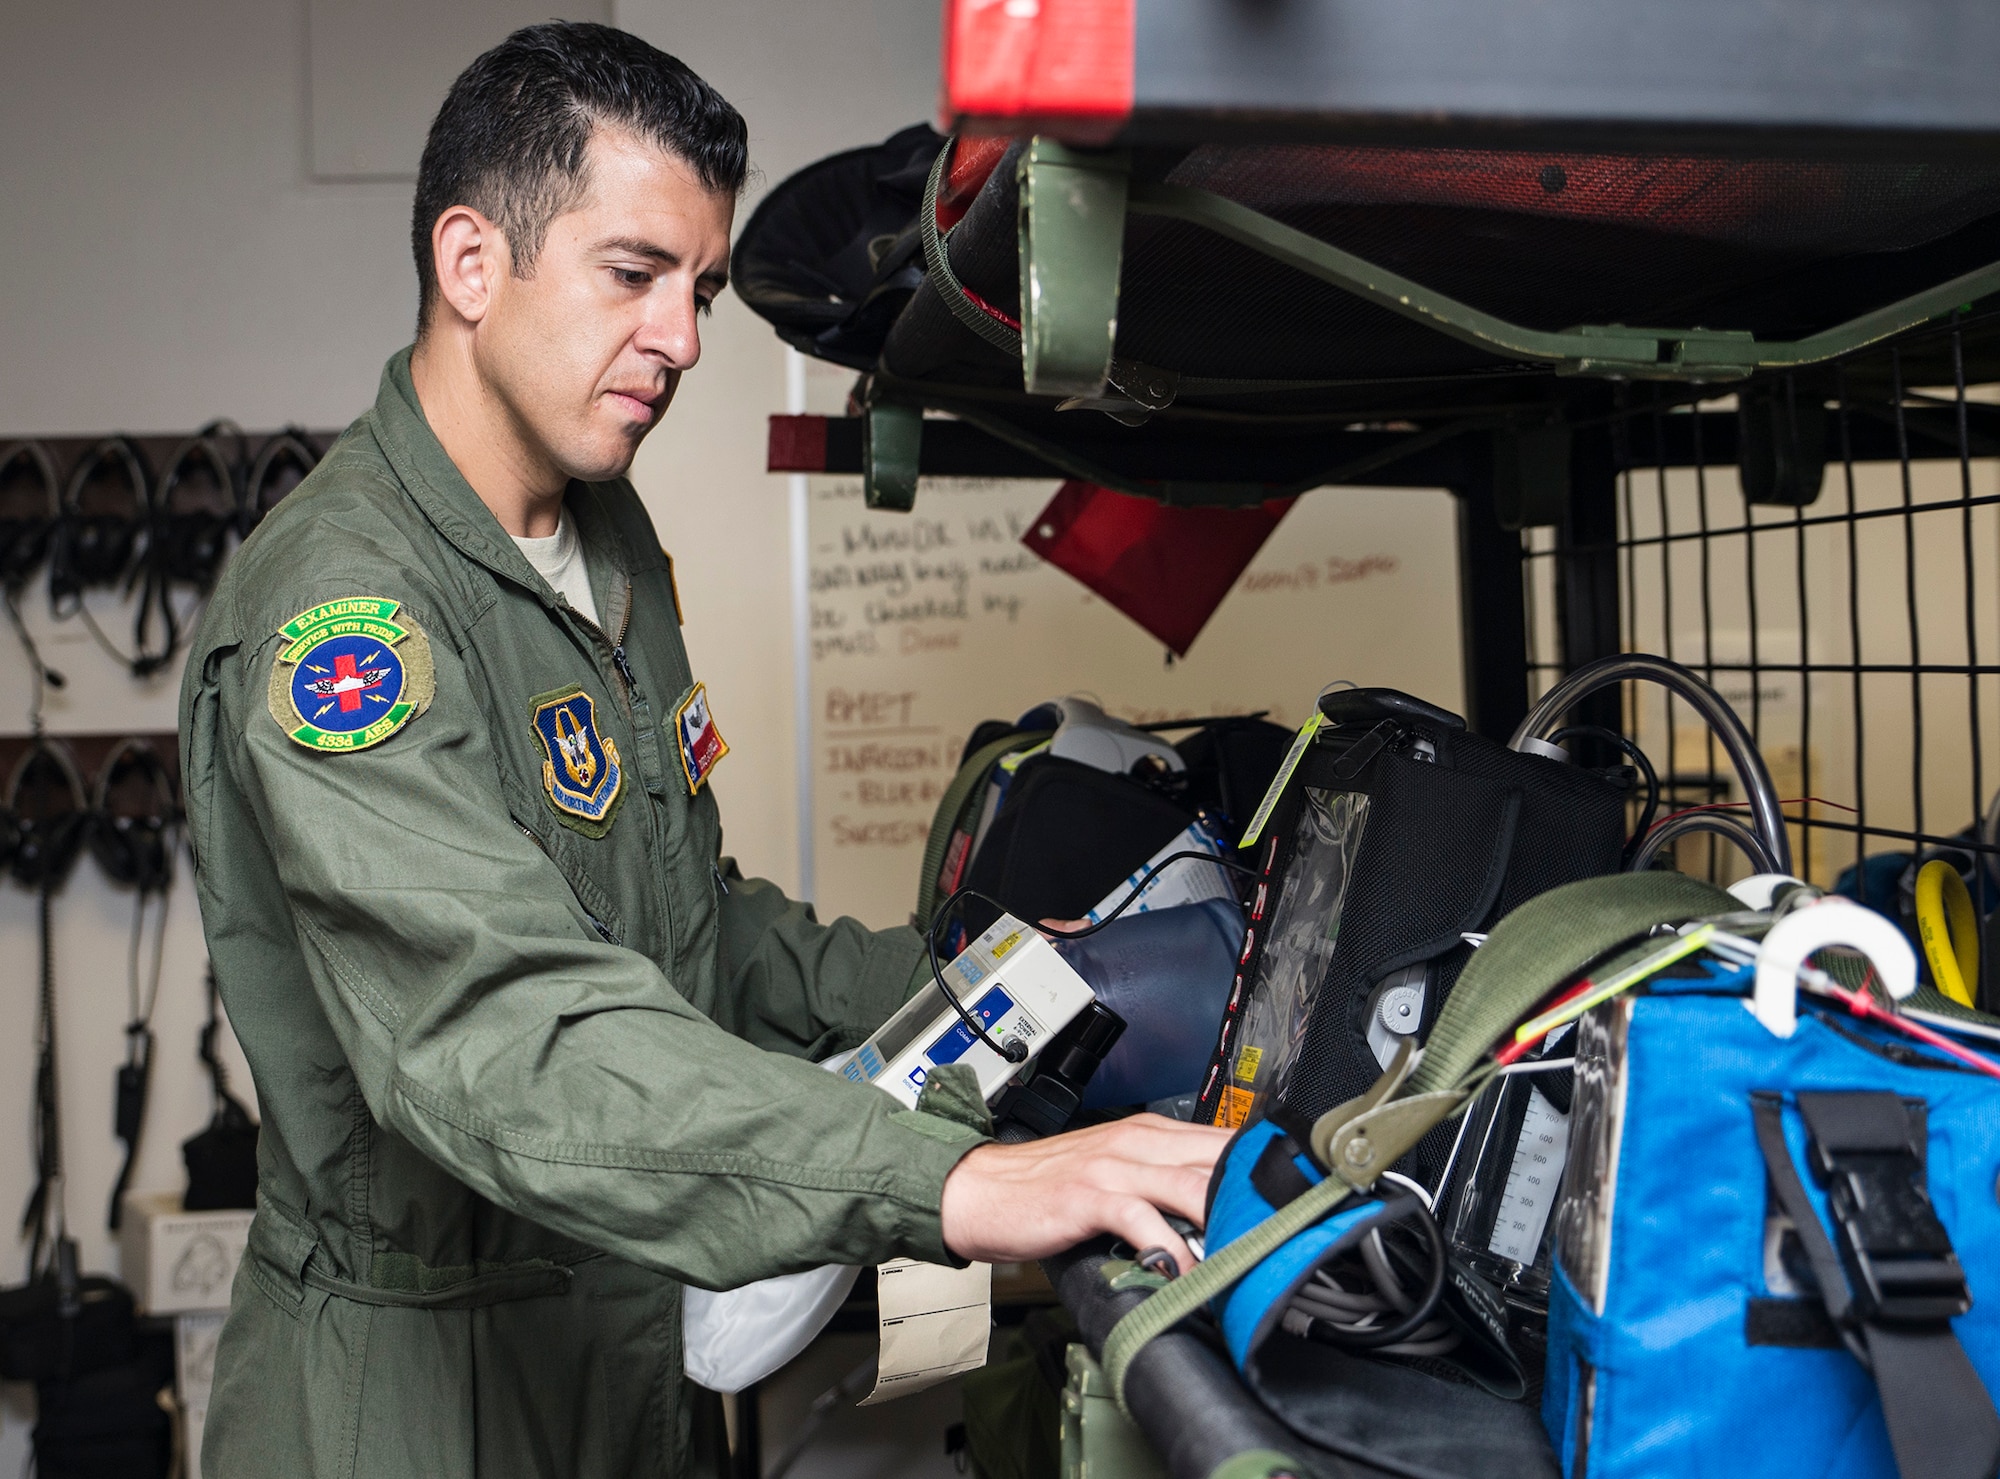 Master Sgt. Tito Carrillo, 433rd Aeromedical Evacuation Squadron flight medic, performs an inventory check on medical equipment Sept. 2, 2016 at Joint Base San Antonio-Lackland, Texas. The team is comprised of 10 marathon runners who will compete with other Air Force major commands in the half and full marathon at the 20th annual Air Force Marathon Sept. 17, 2016 at Wright-Patterson Air Force Base, Ohio. (U.S. Air Force photo by Benjamin Faske)